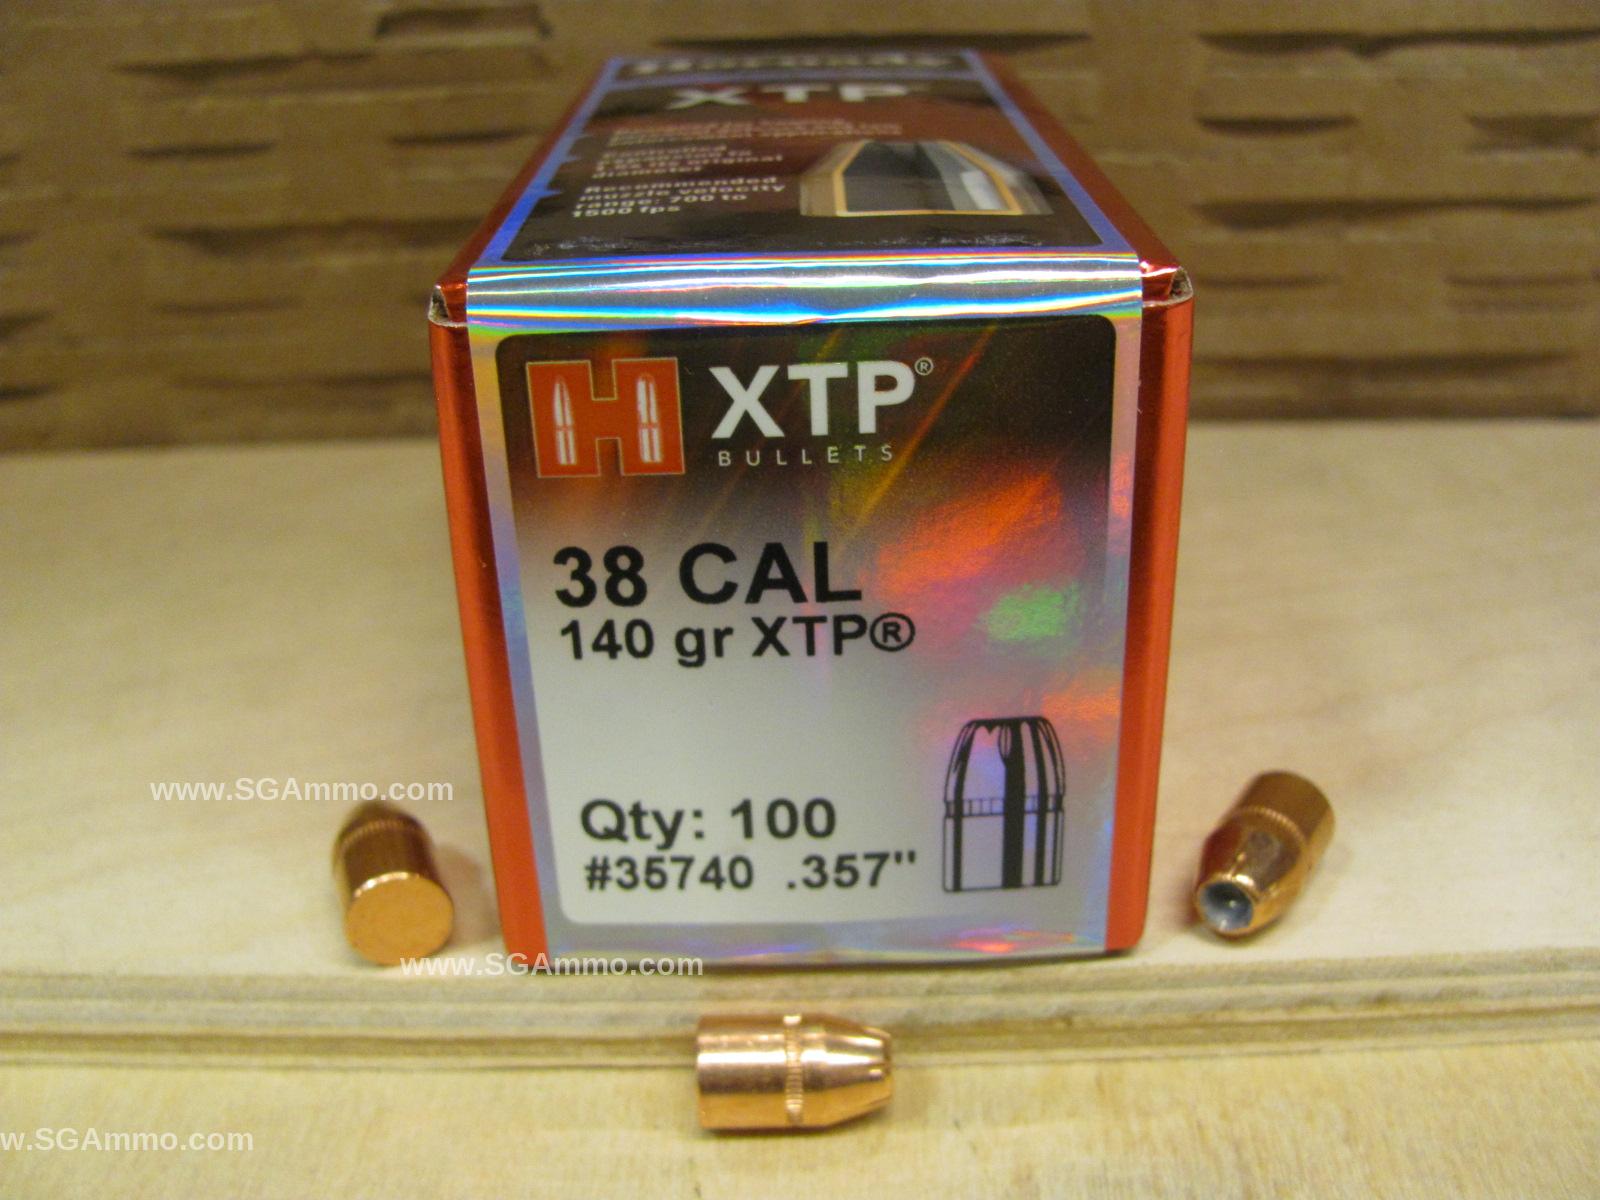 100 Count Box - 38 Cal 140 Grain XTP Projectile For Handloading .357